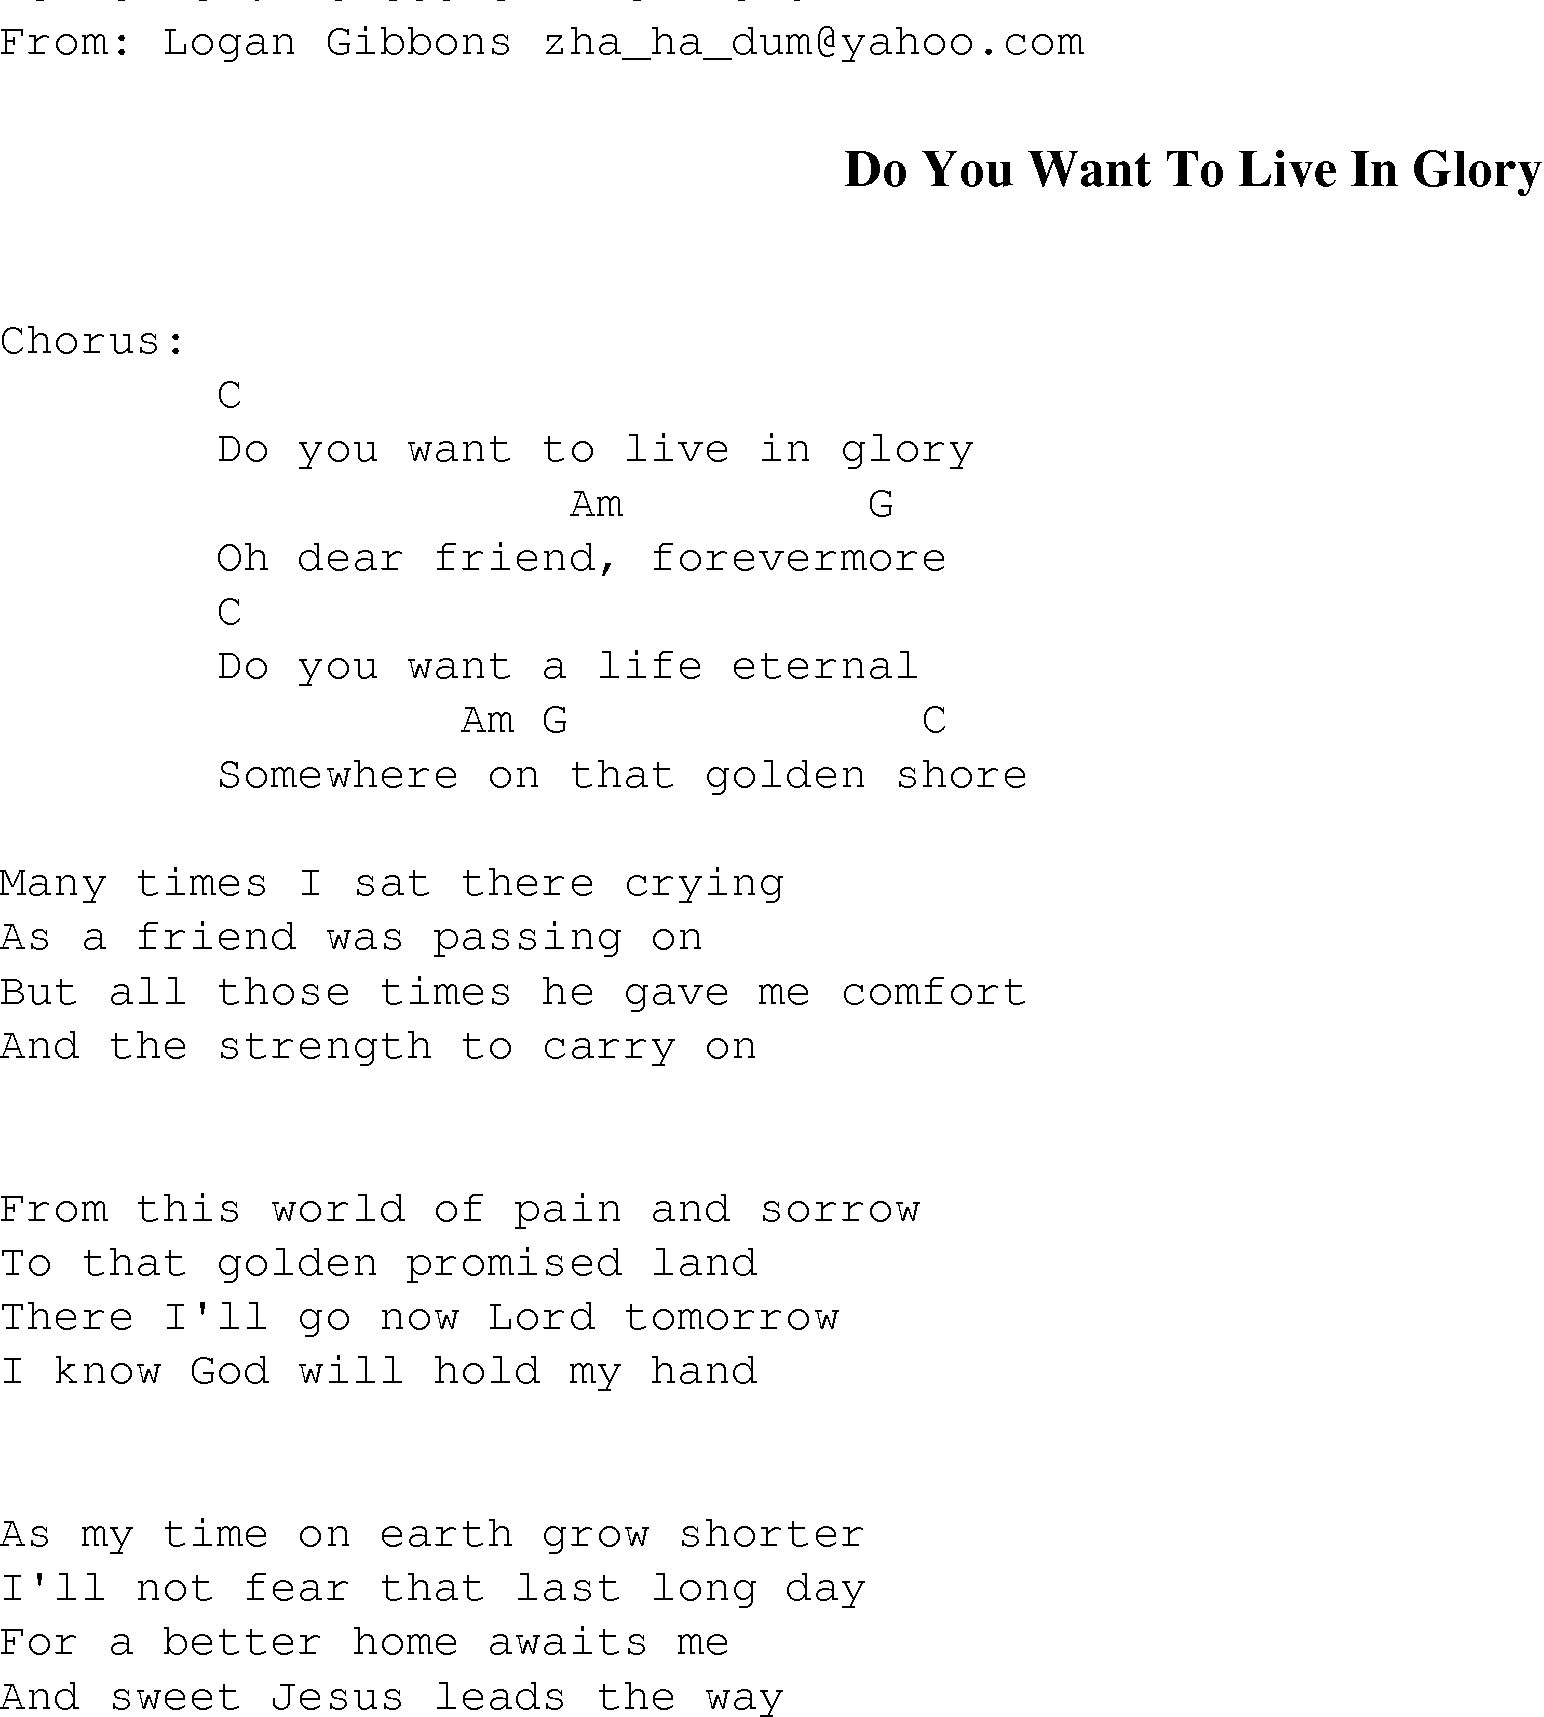 Gospel Song: do_you_want_live_in_glory, lyrics and chords.